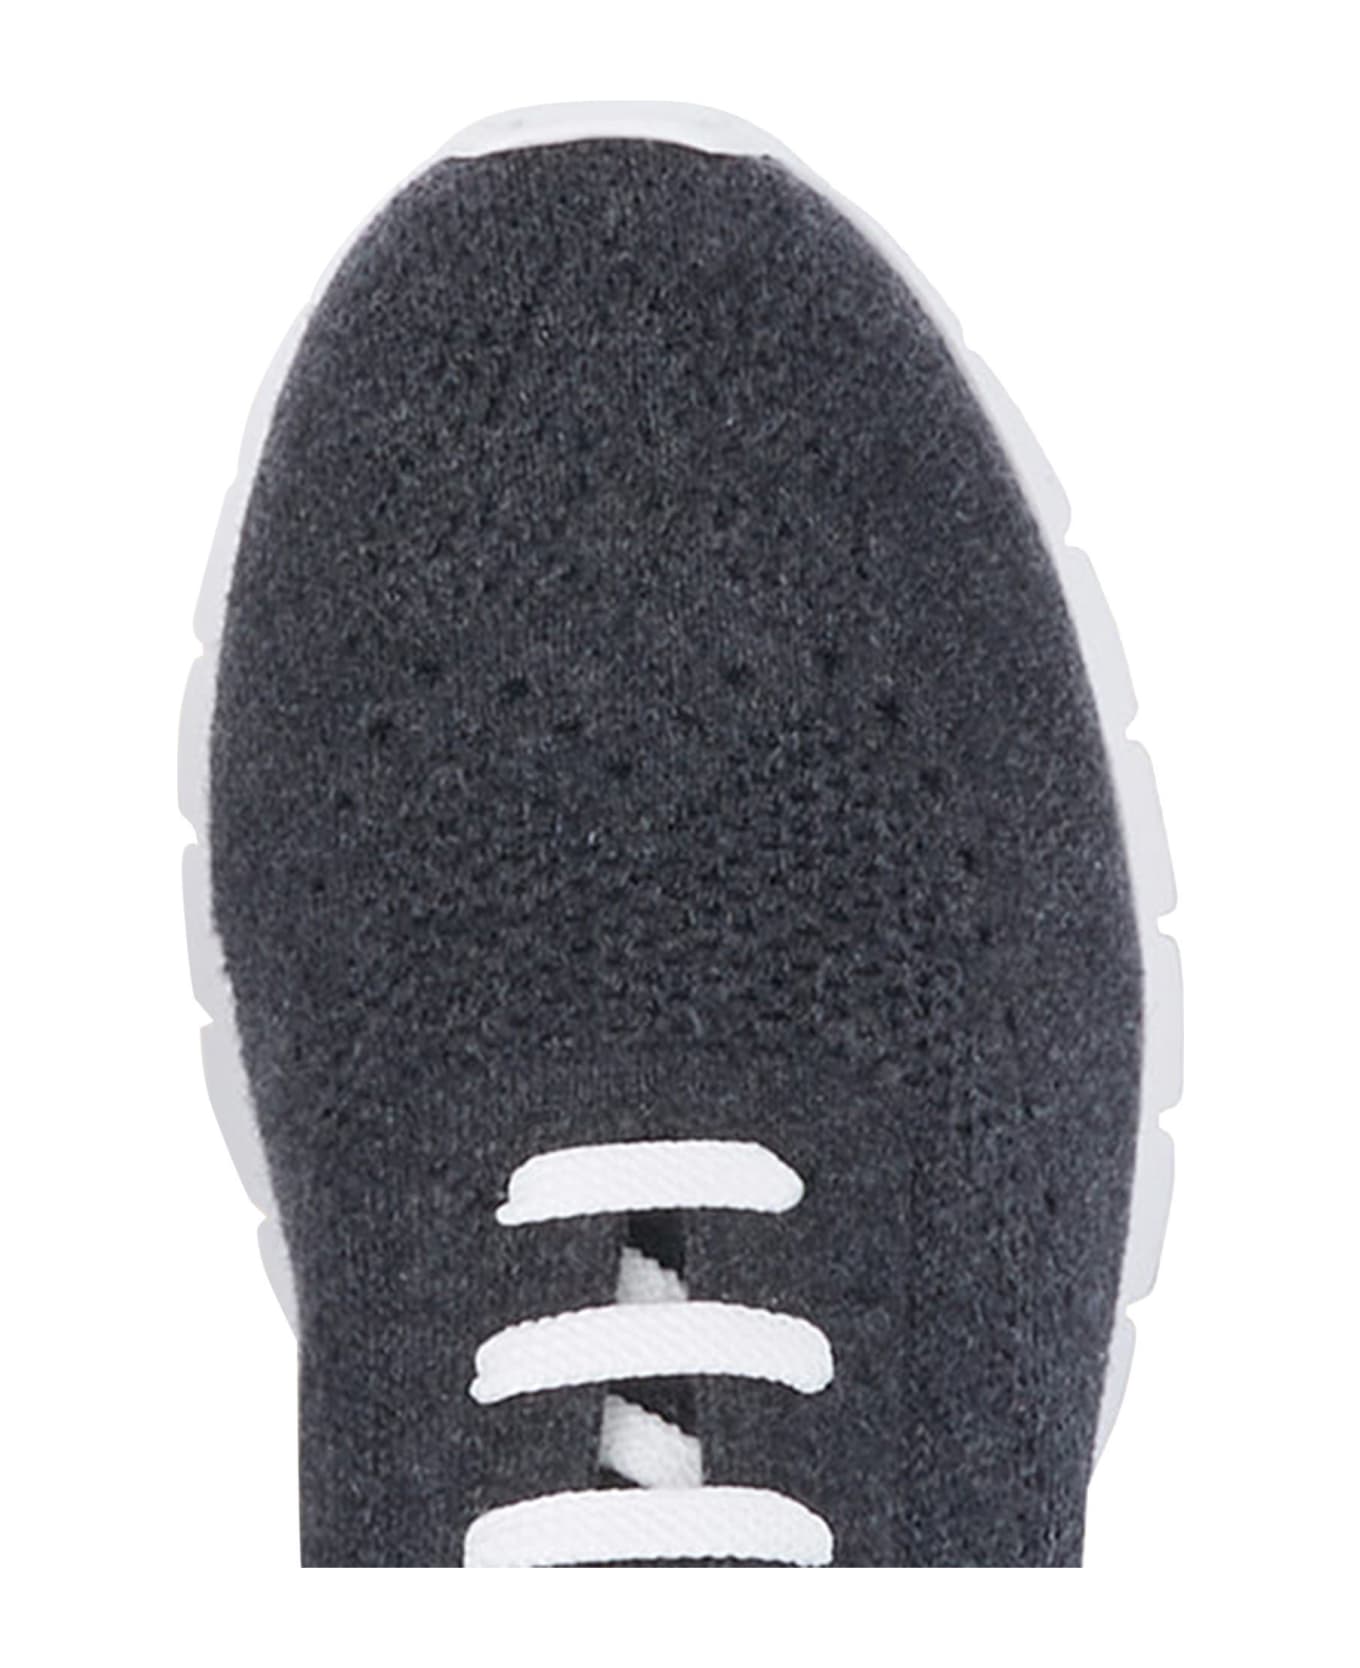 Kiton Sneakers Shoes Cashmere - ANTHRACITE スニーカー